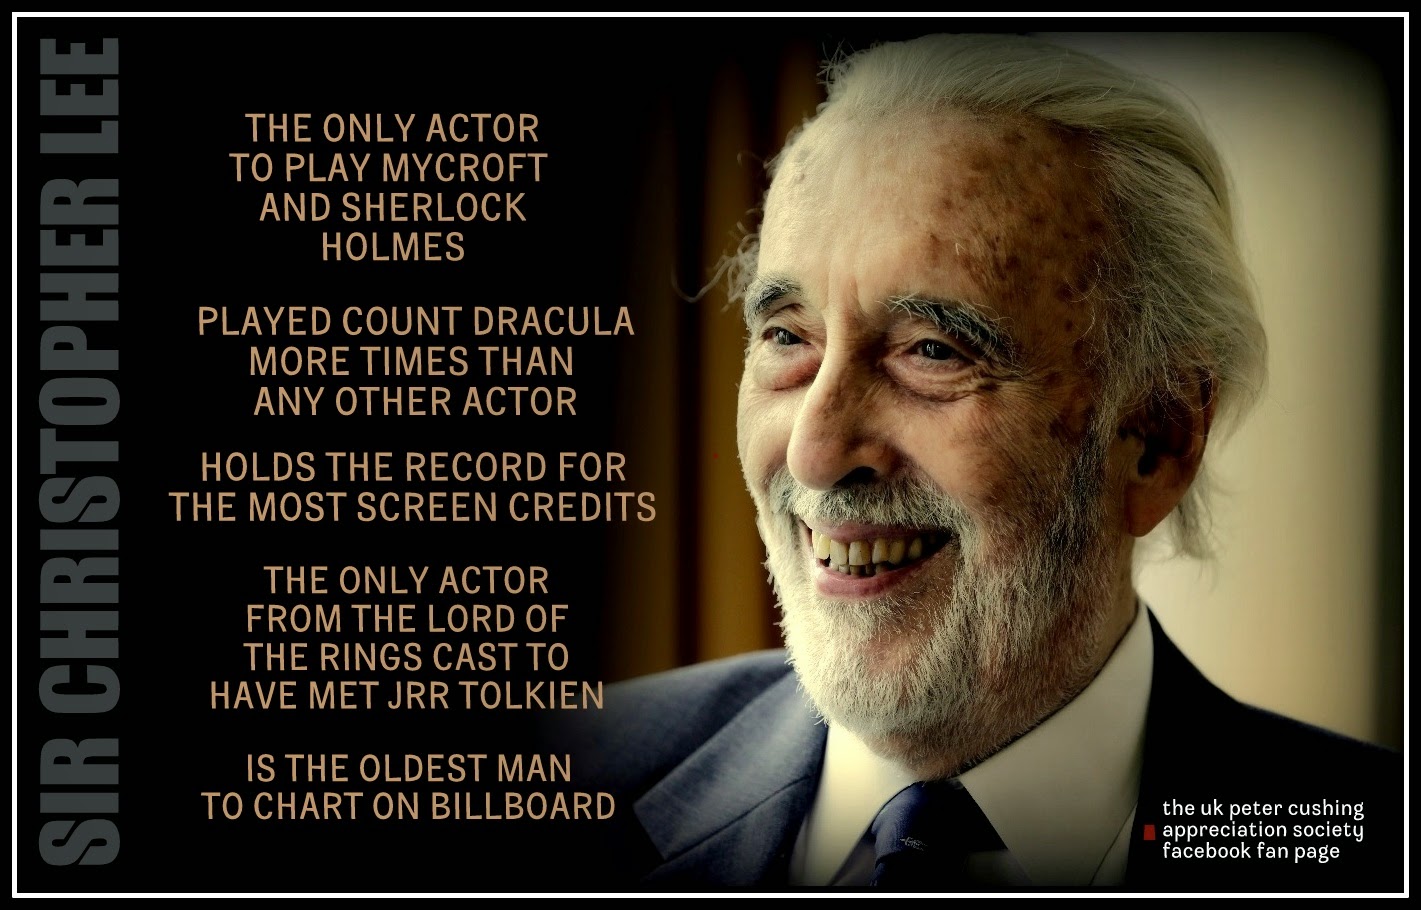  (PCASUK): THE MAN WITH THE GOLDEN LIFE: SIR CHRISTOPHER  LEE